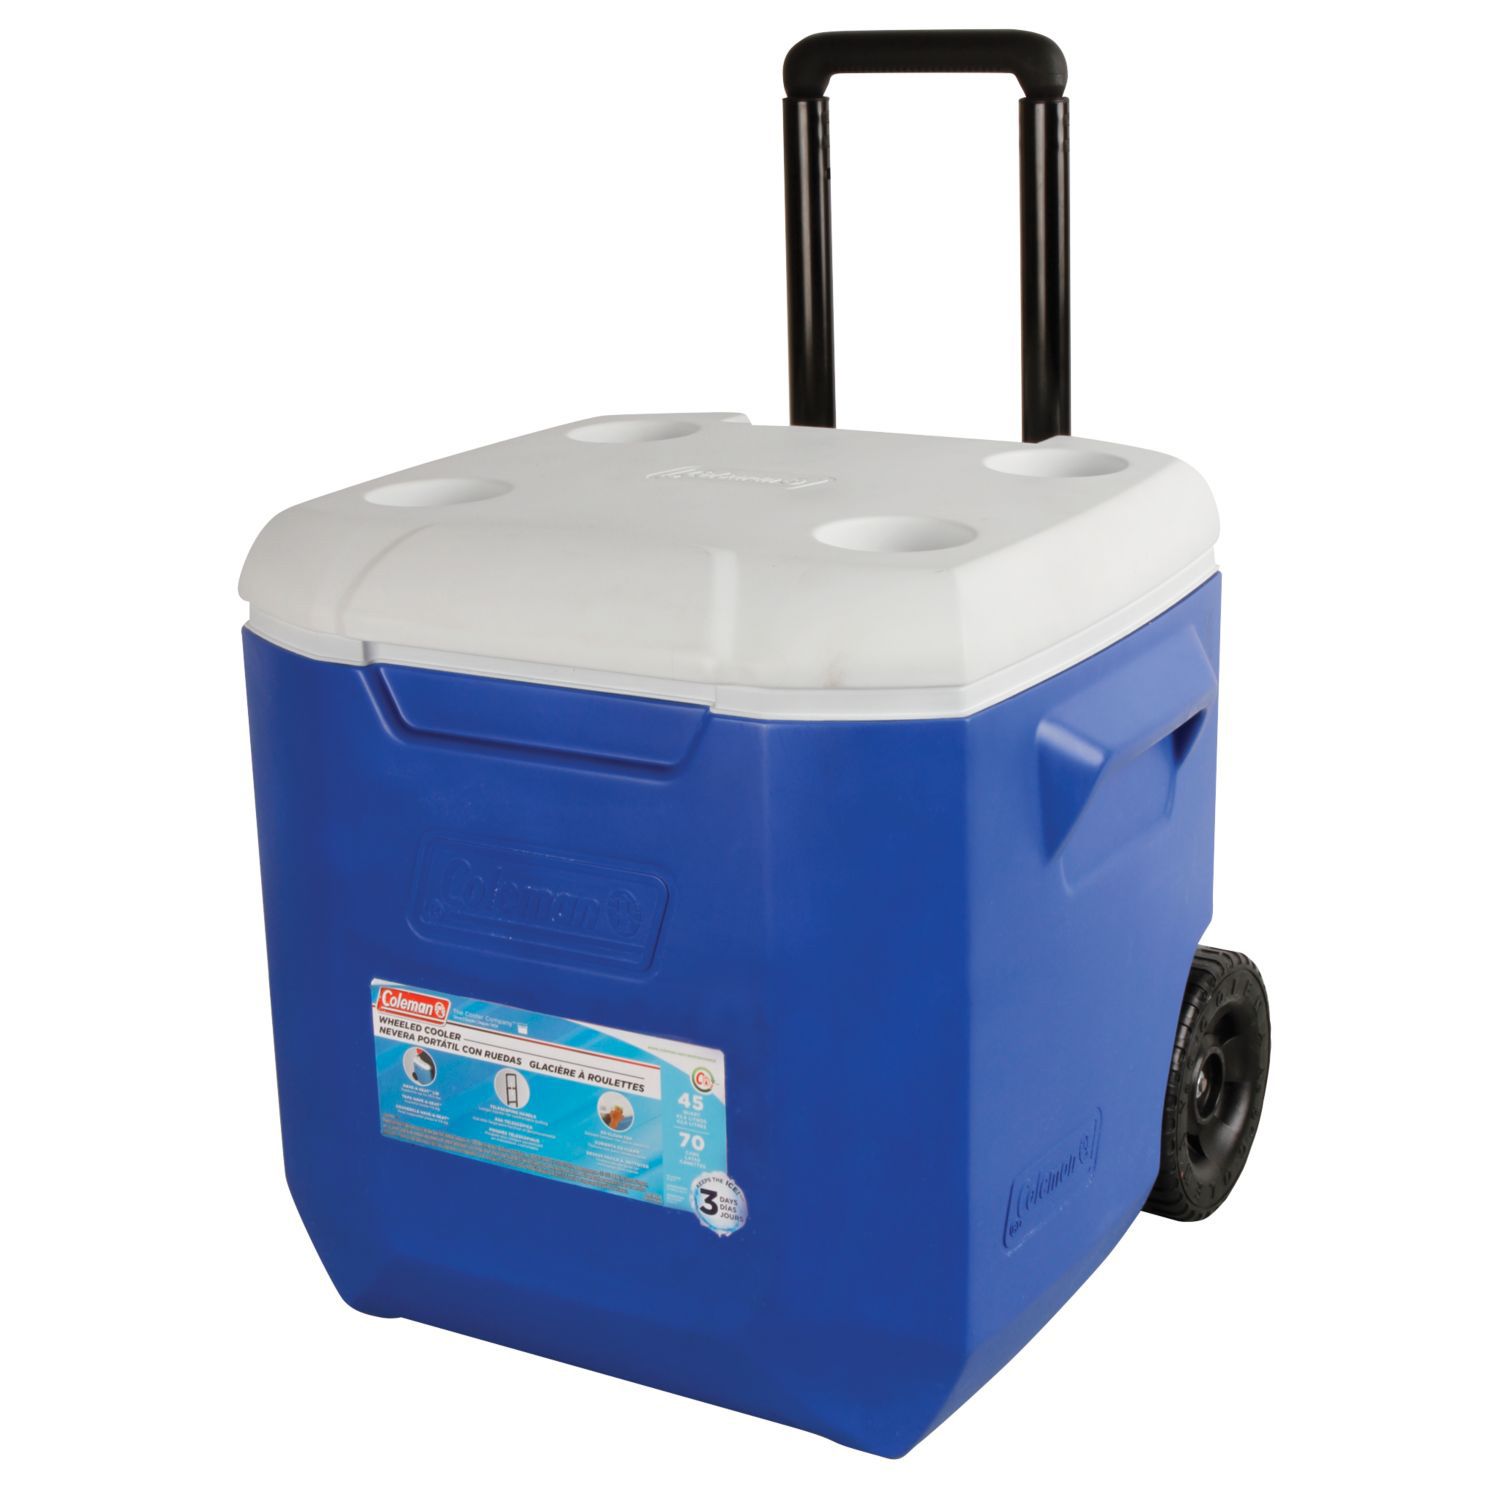 48 quart cooler with wheels